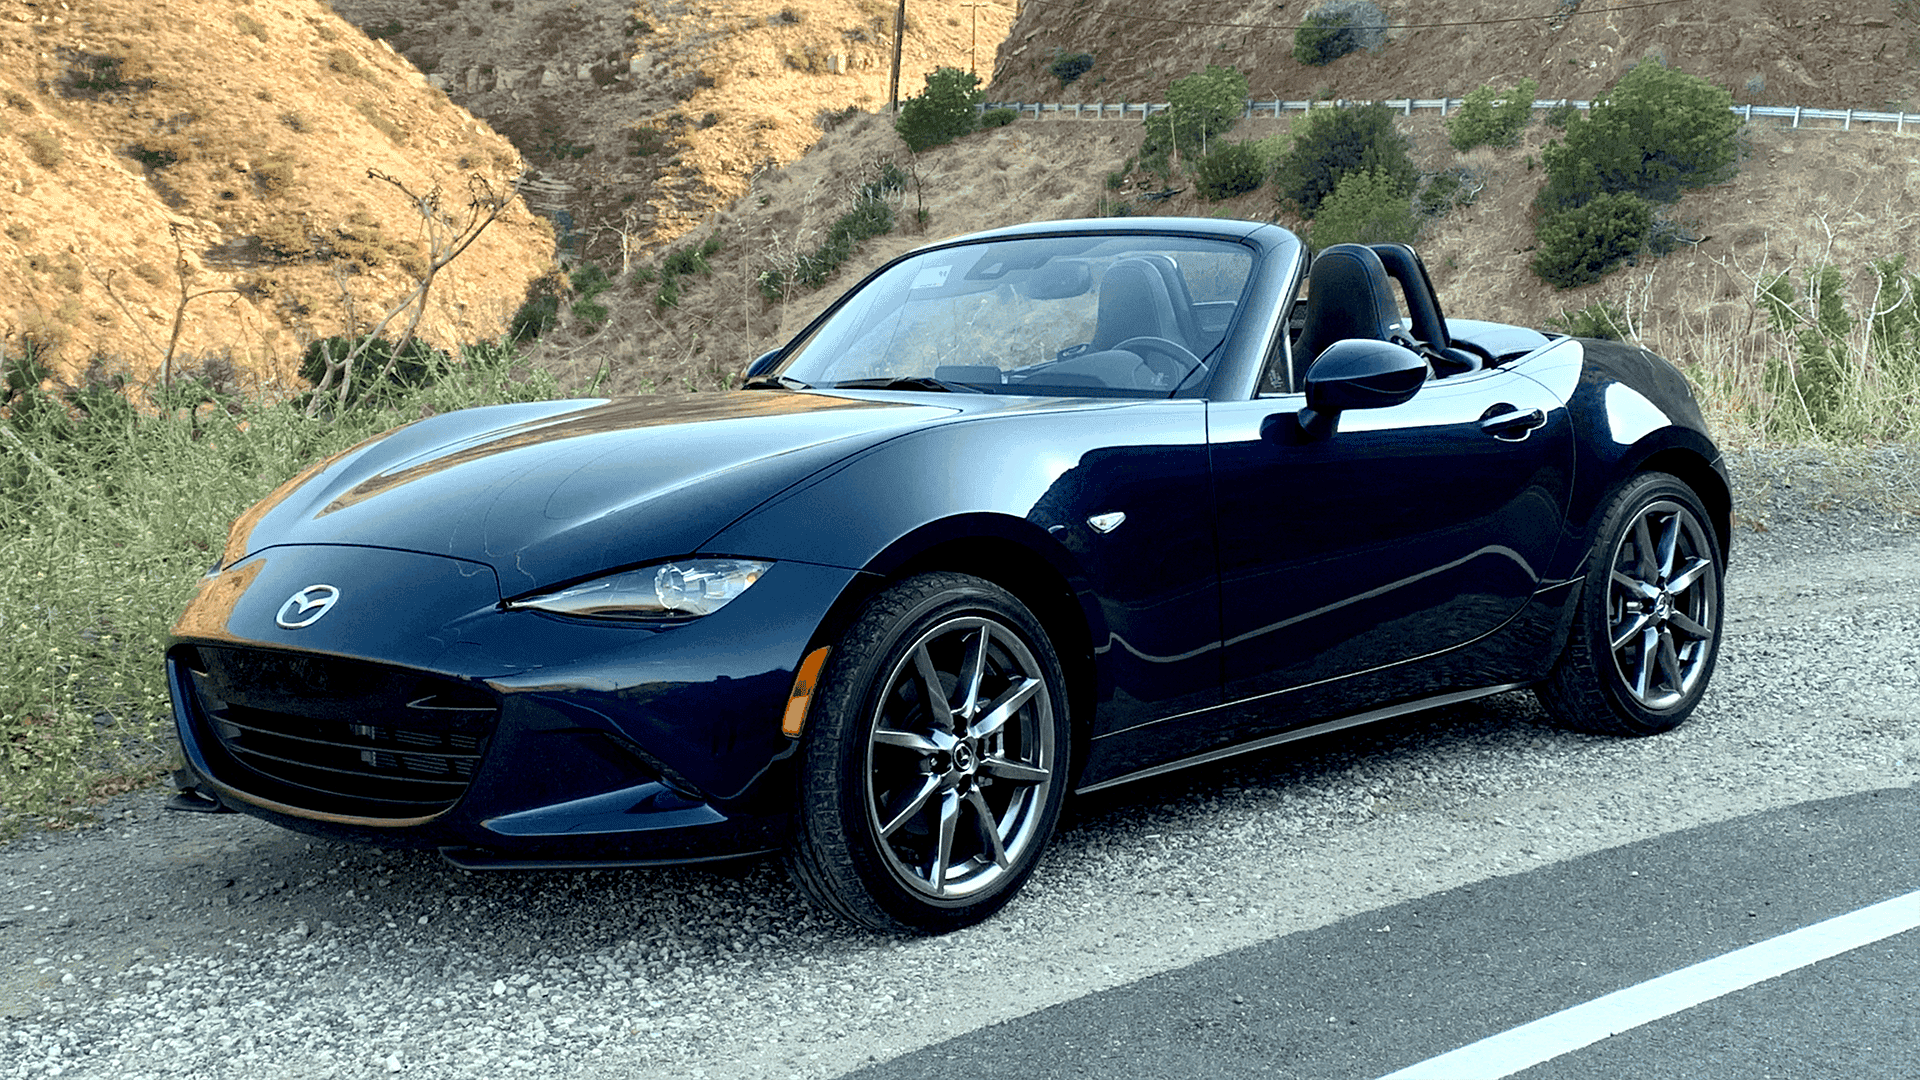 2021 Mazda MX5 Miata Review Still a Pure Driver's Car After 32 Years